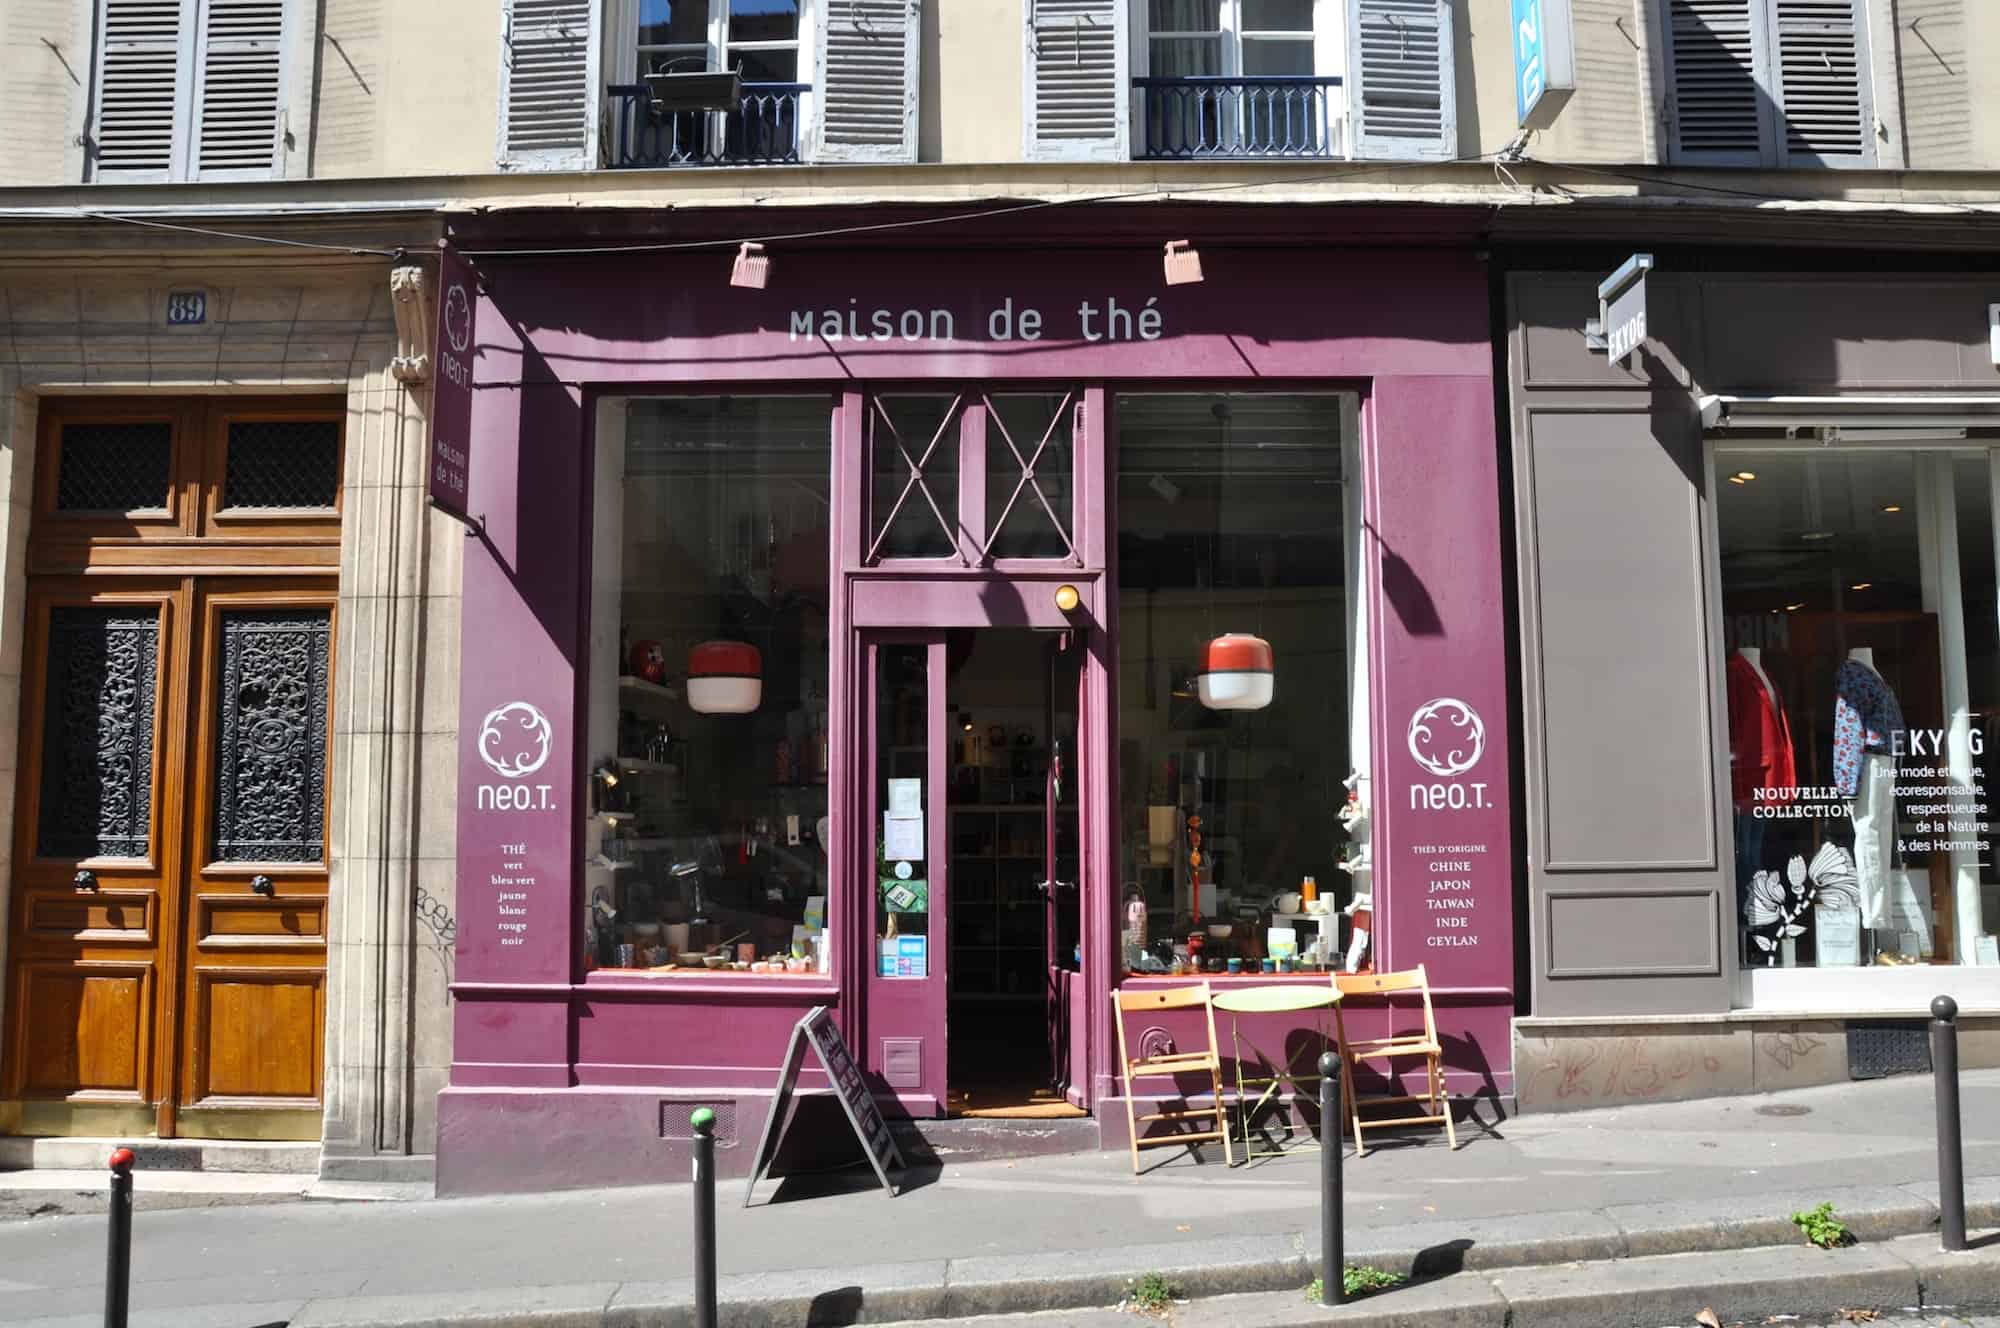 An Independent Tea House’s Success in Montmartre: Neo. T.